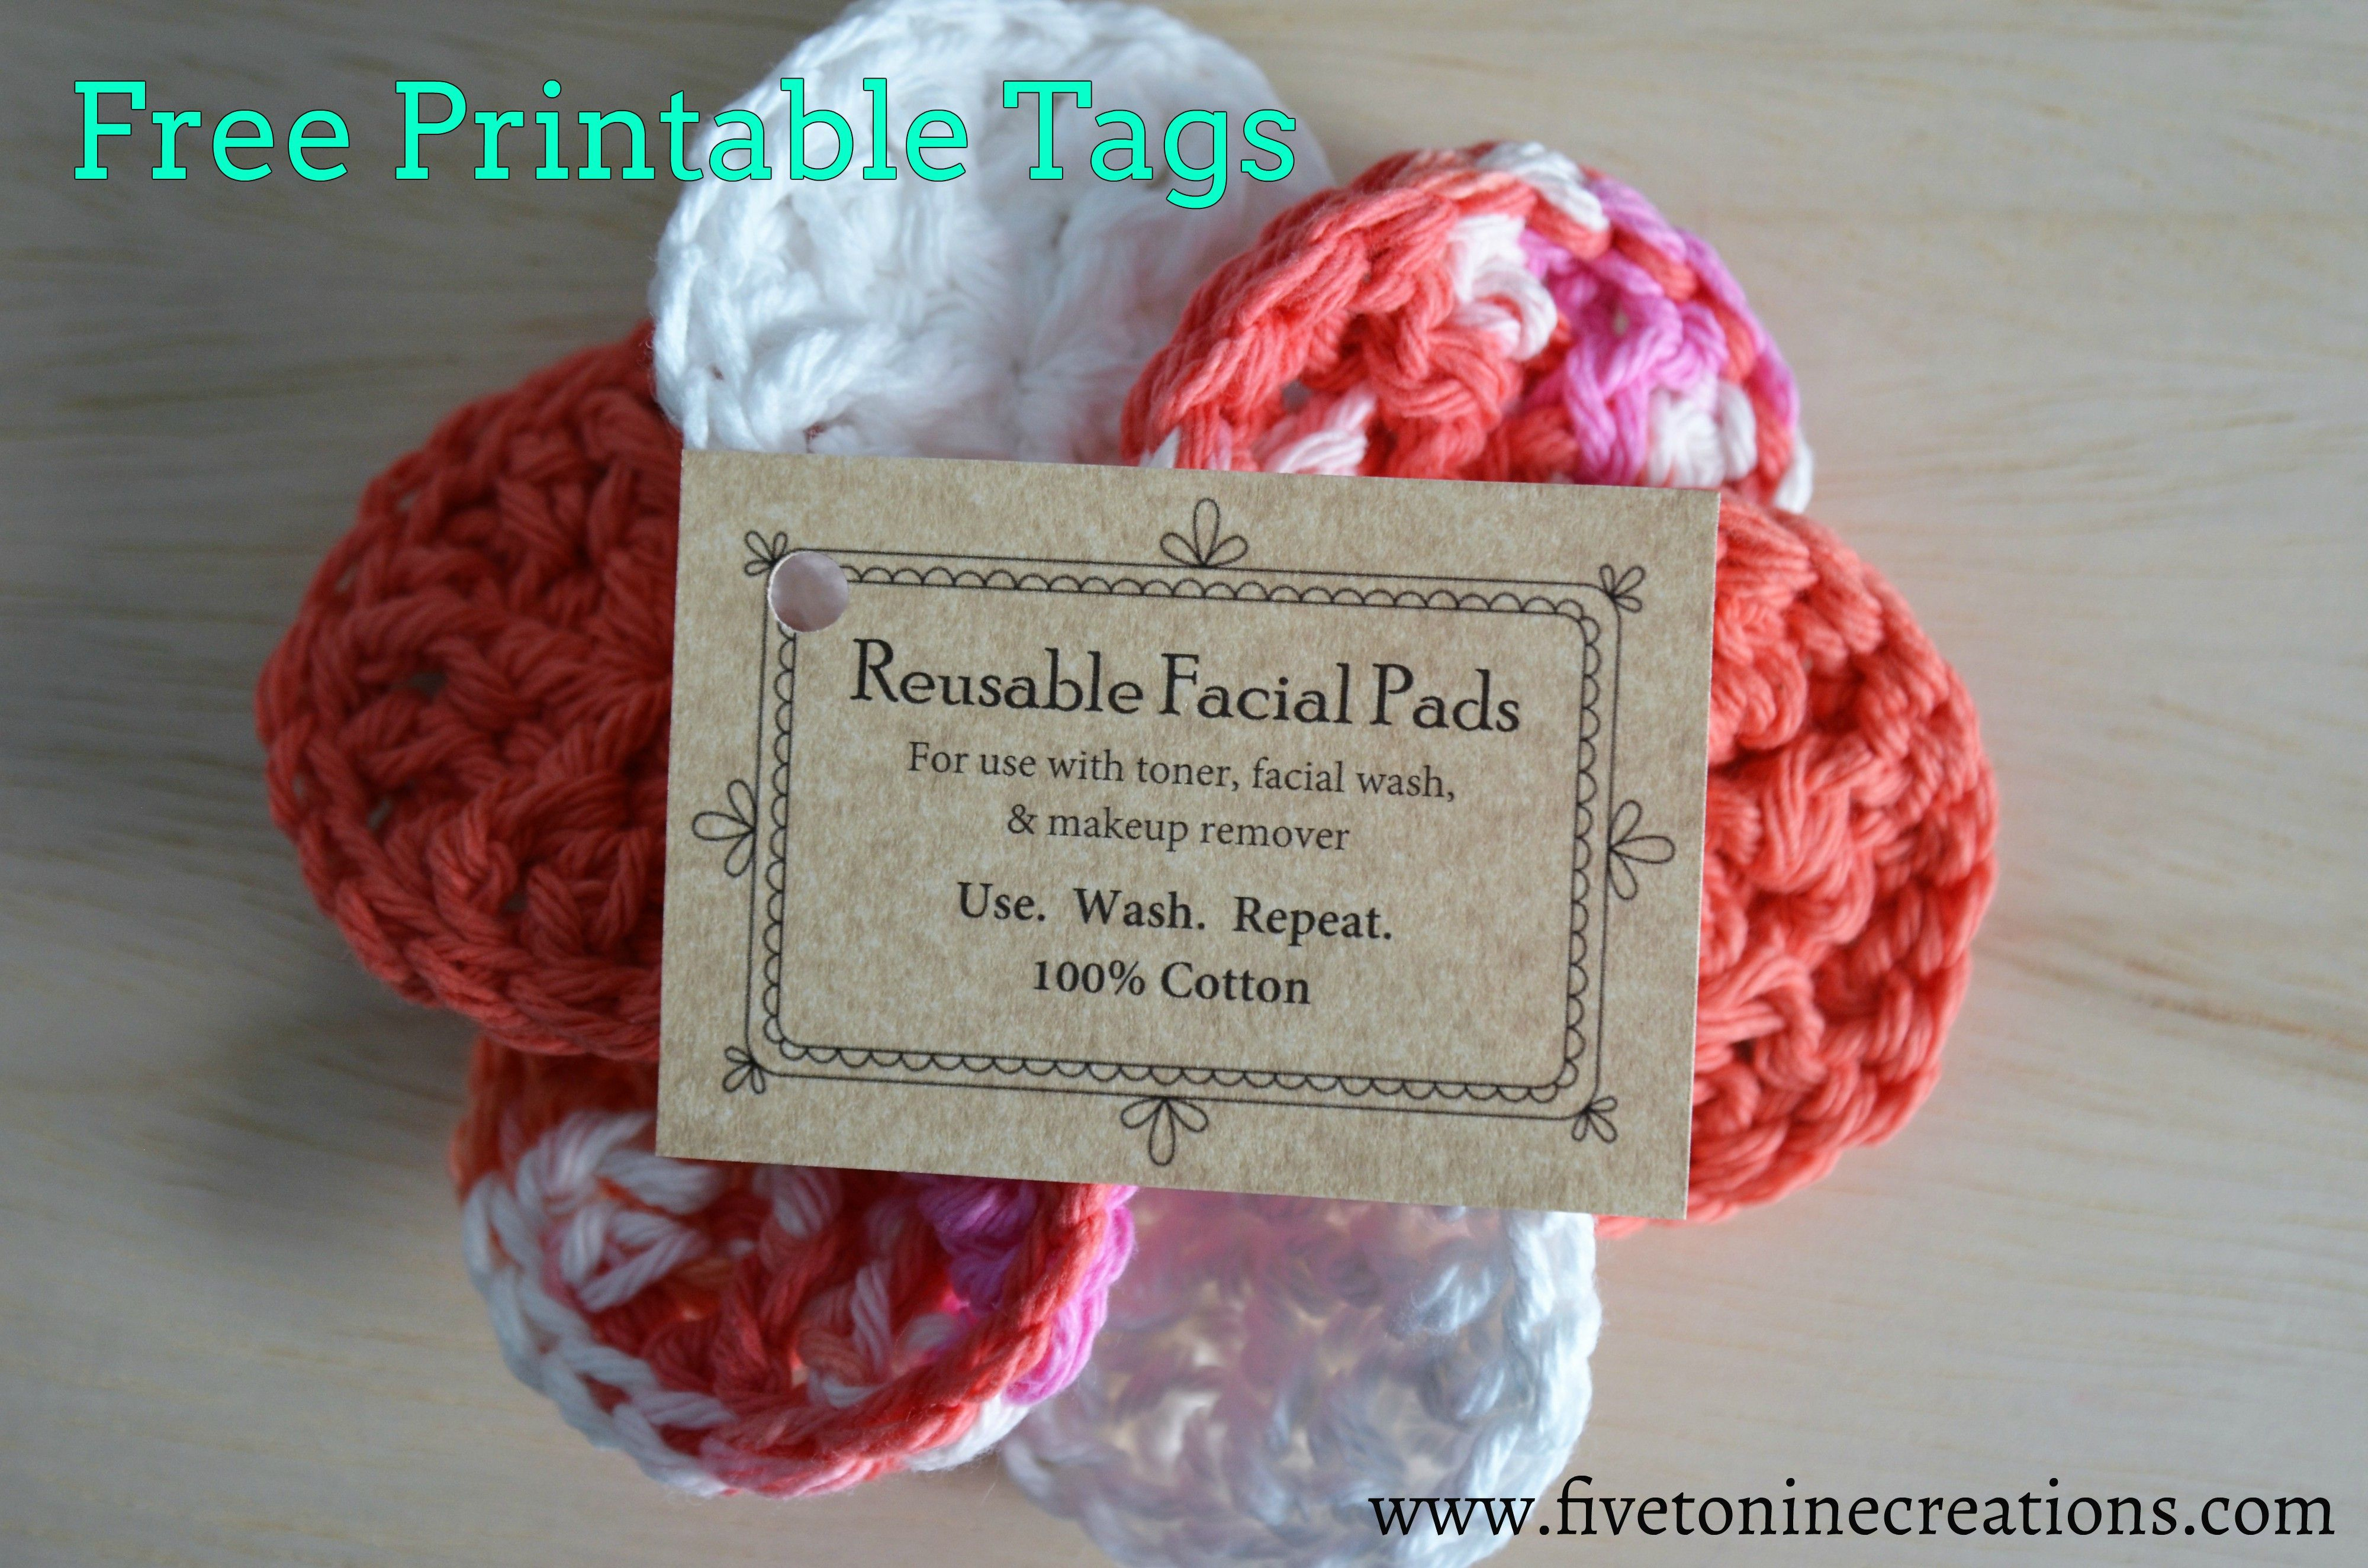 Free Printable Tags For Face Scrubby Pads. Comes With Free Crochet - Free Printable Dishcloth Wrappers